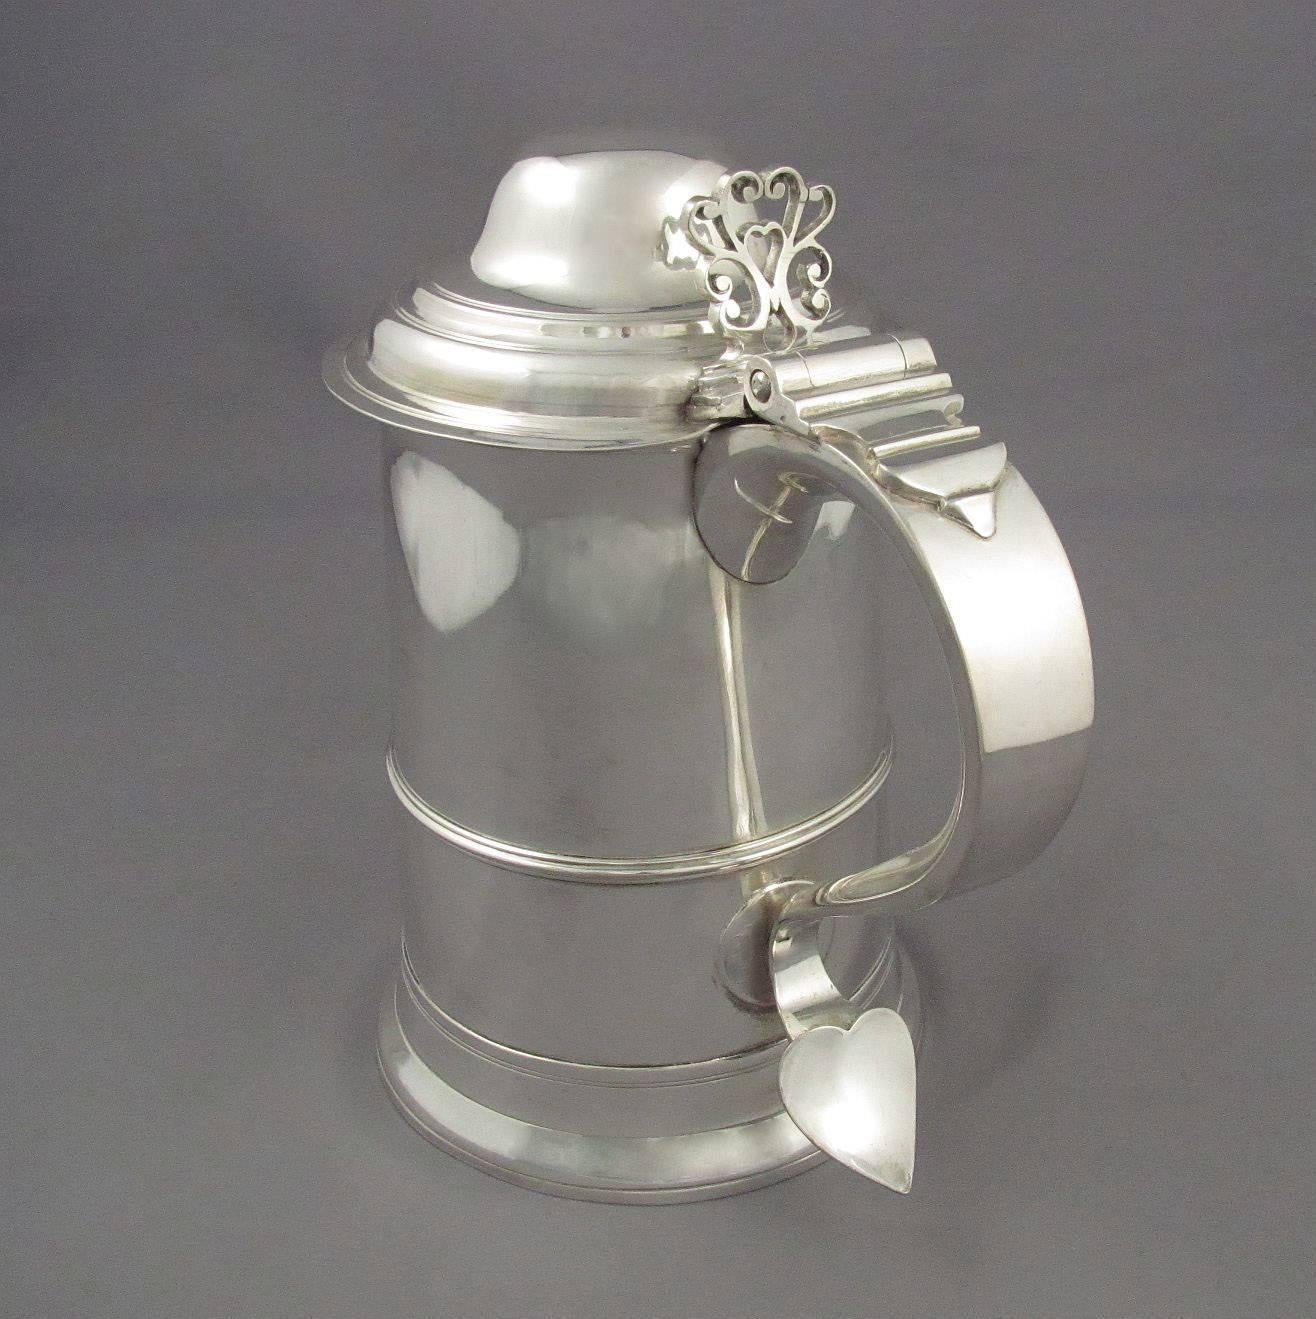 George III sterling silver tankard by Samuel Godbehere & Edward Wigan, London, 1791. Straight sided with domed lid and scroll handle. Measures: 7.5" (19.1cm) high, 22 troy ounces (683.9g).